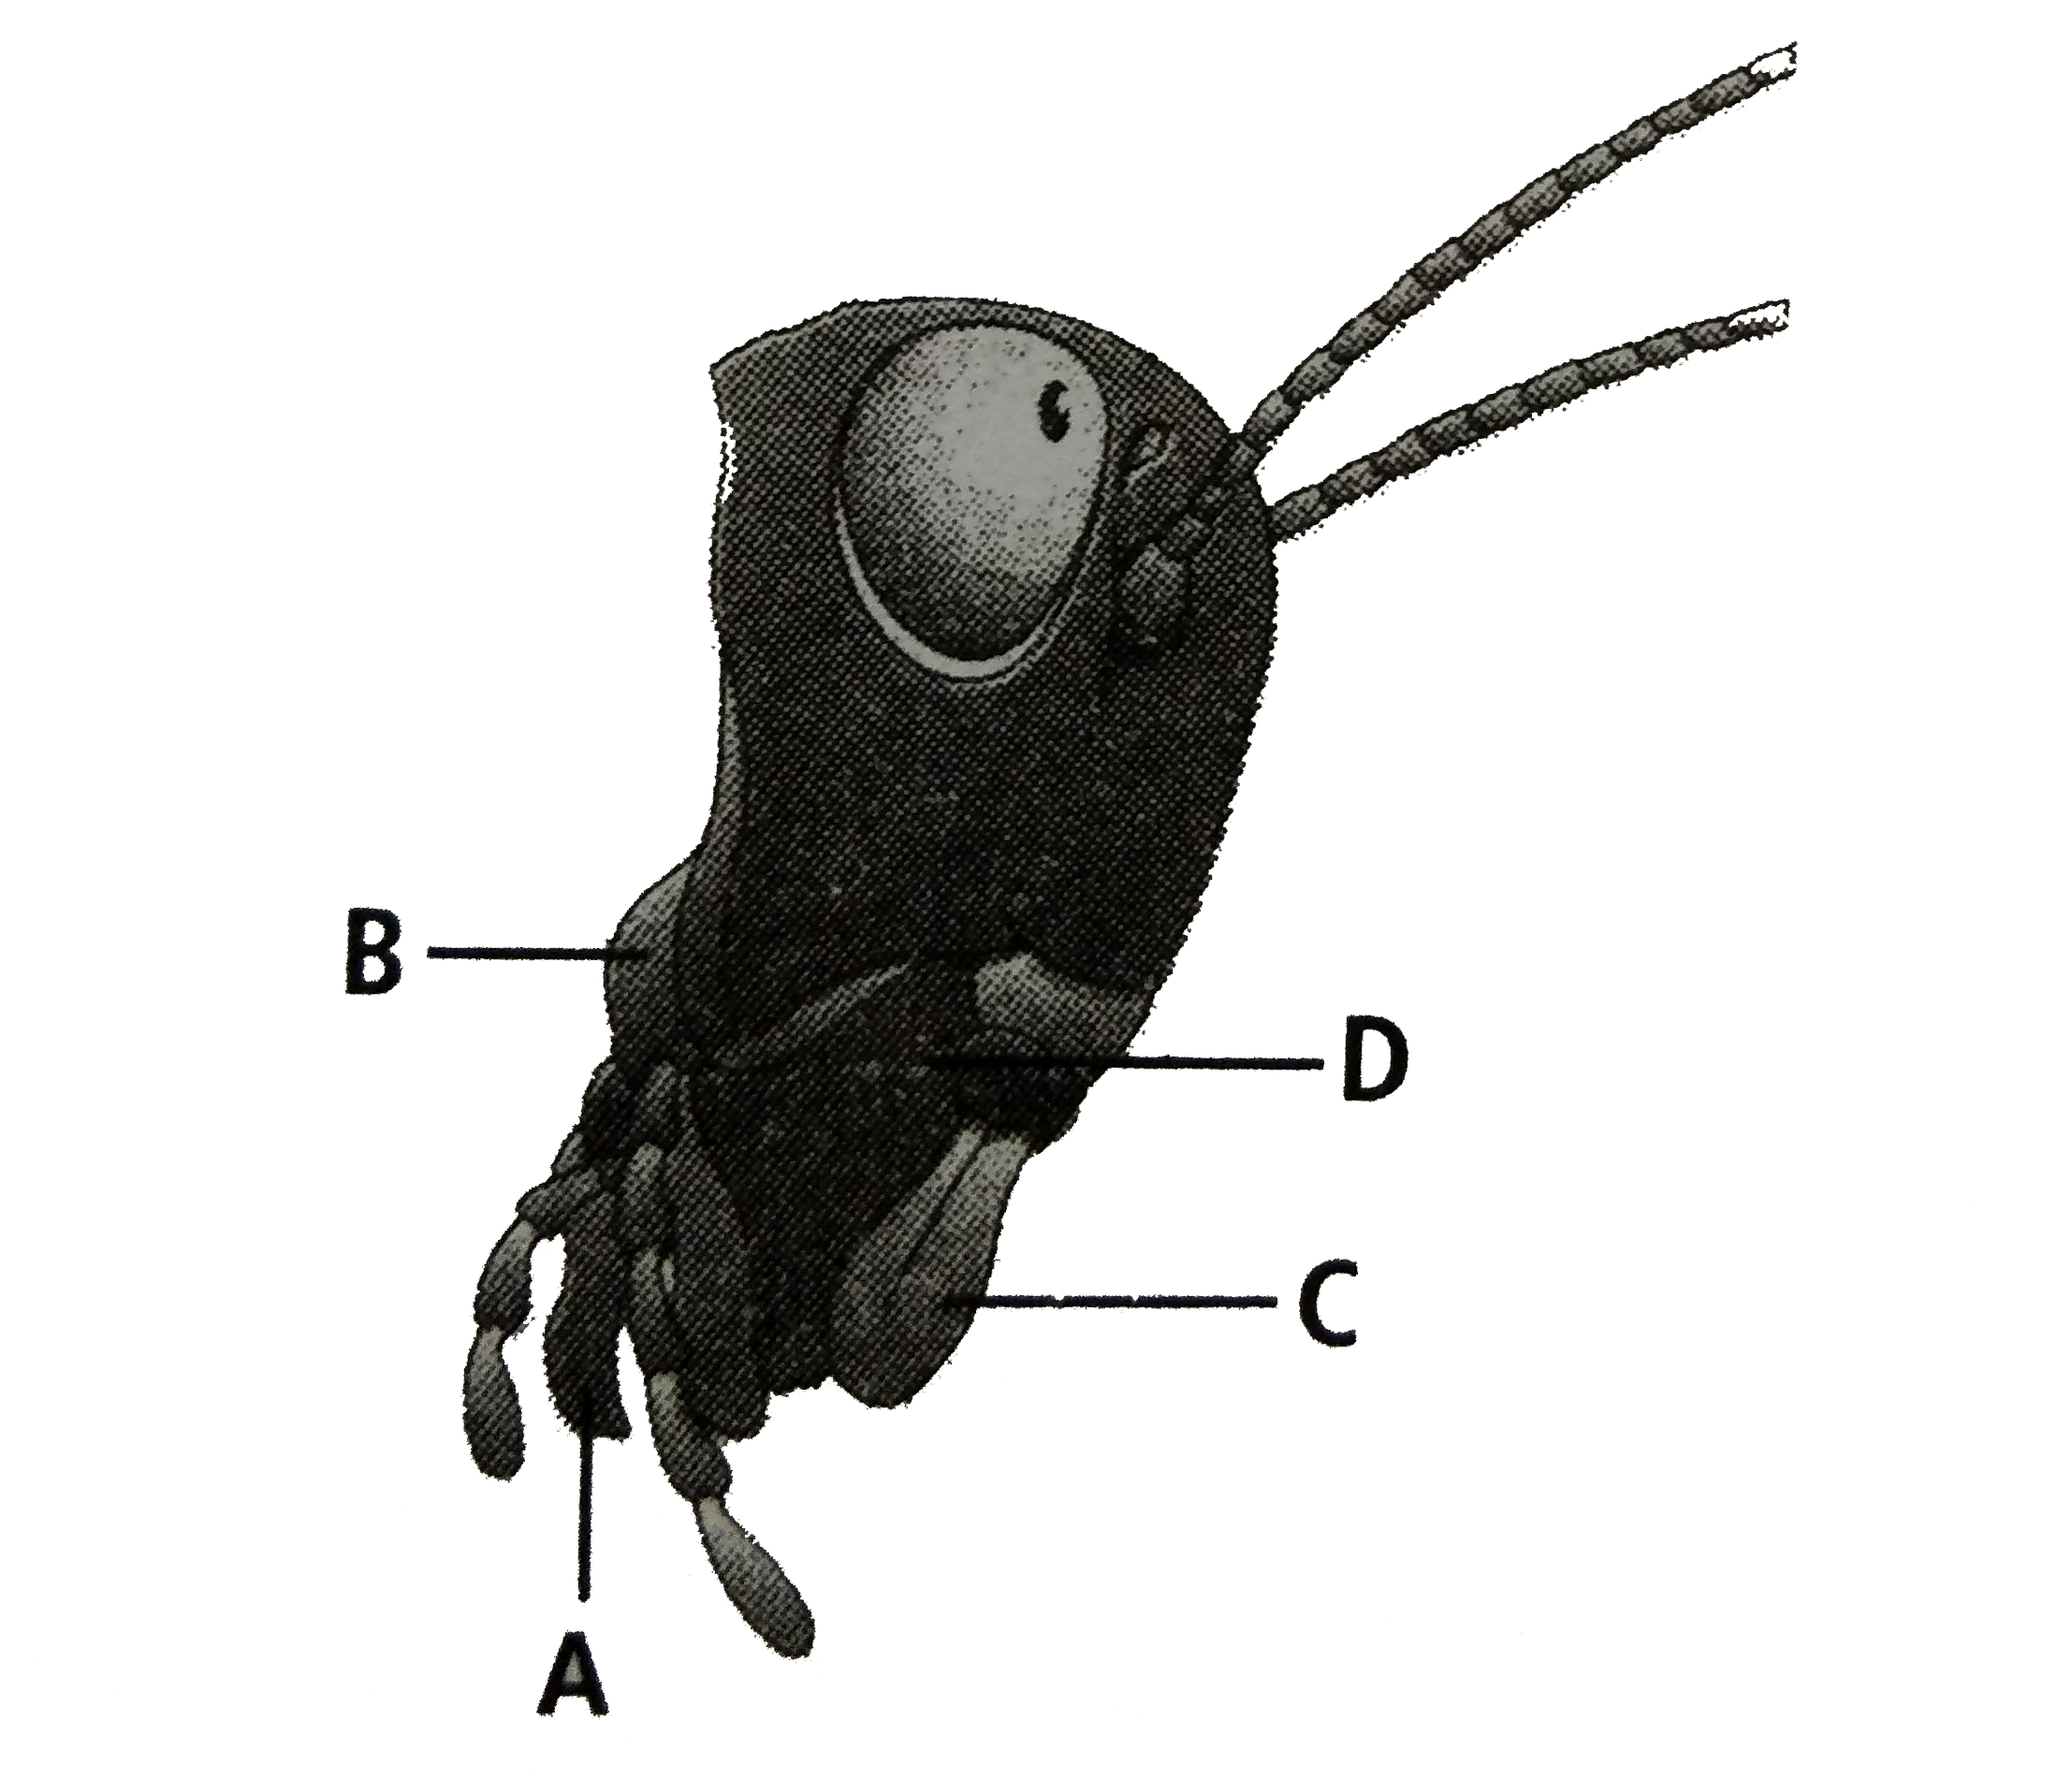 The given figure represent heat region of cockroach. In which one of the options all the four parts A,B,C and D are labelled correctly ?